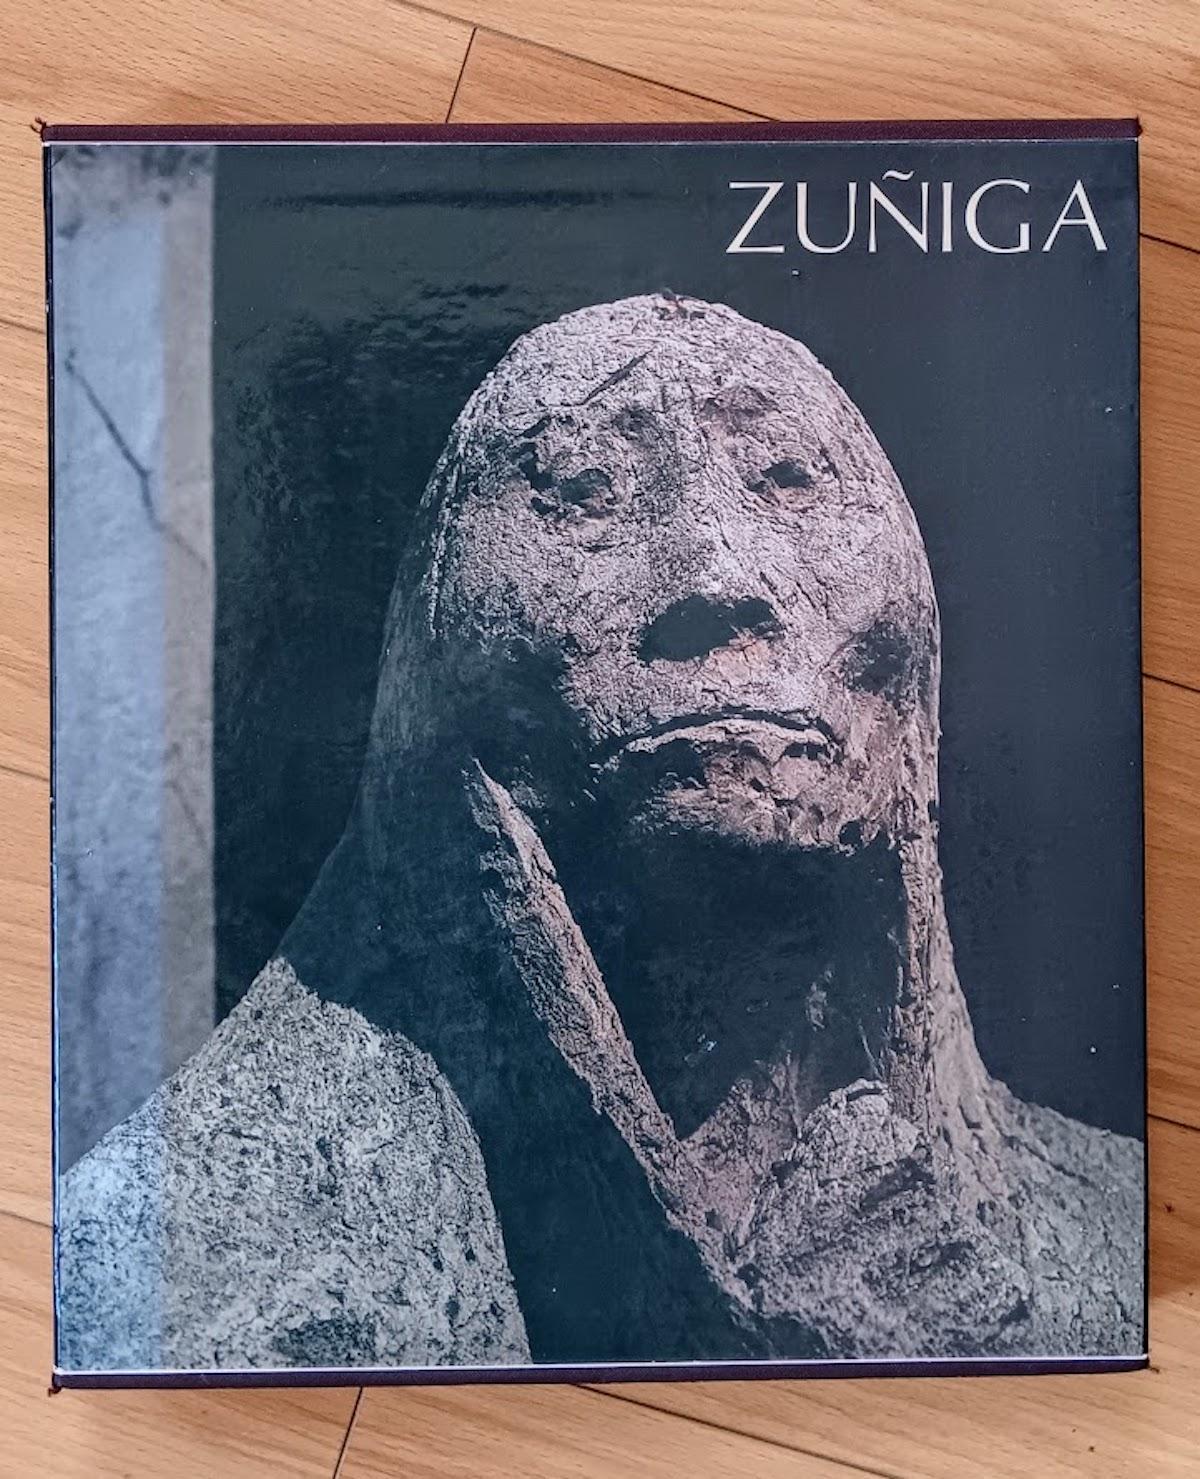 Beautiful and rare Book of Francisco Zuñiga Artist Monograph,
1st Misrachi Art Gallery Edition, 1980
Text in Spanish and English. 317 pages with 355 plates.
Hardcover with slipcase.
Size is 14 x 12 x 2in 
Very good condition.